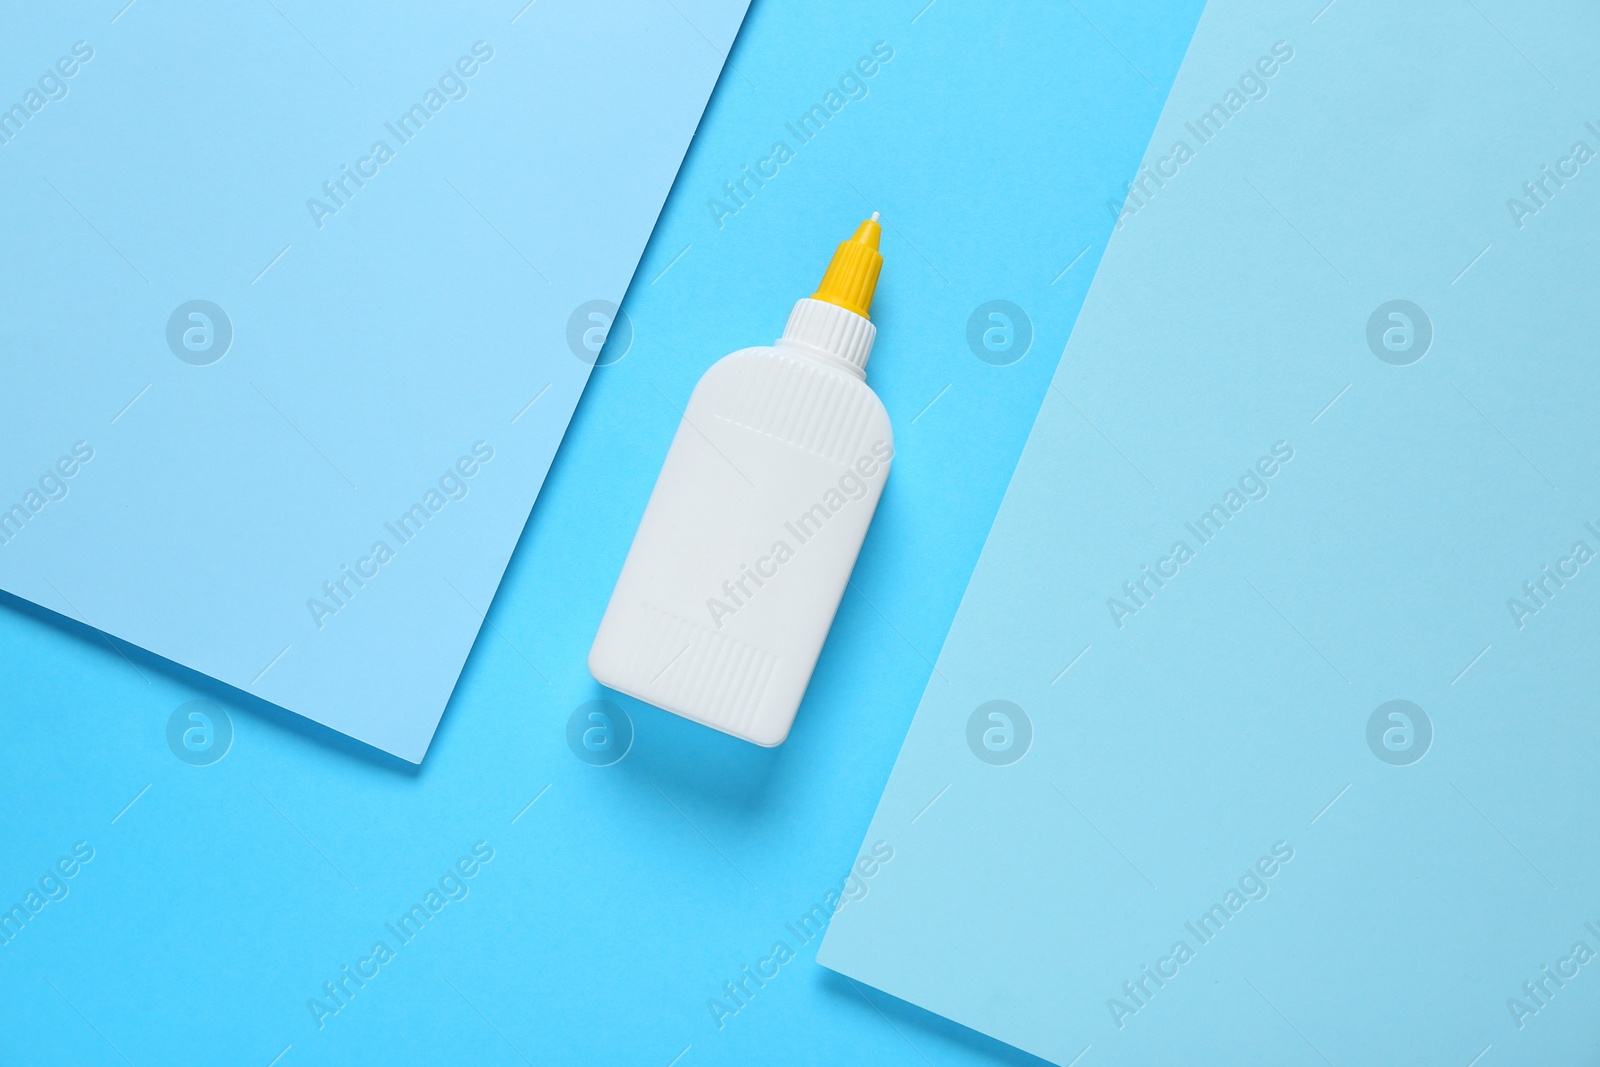 Photo of Bottle of glue and paper on light blue background, flat lay